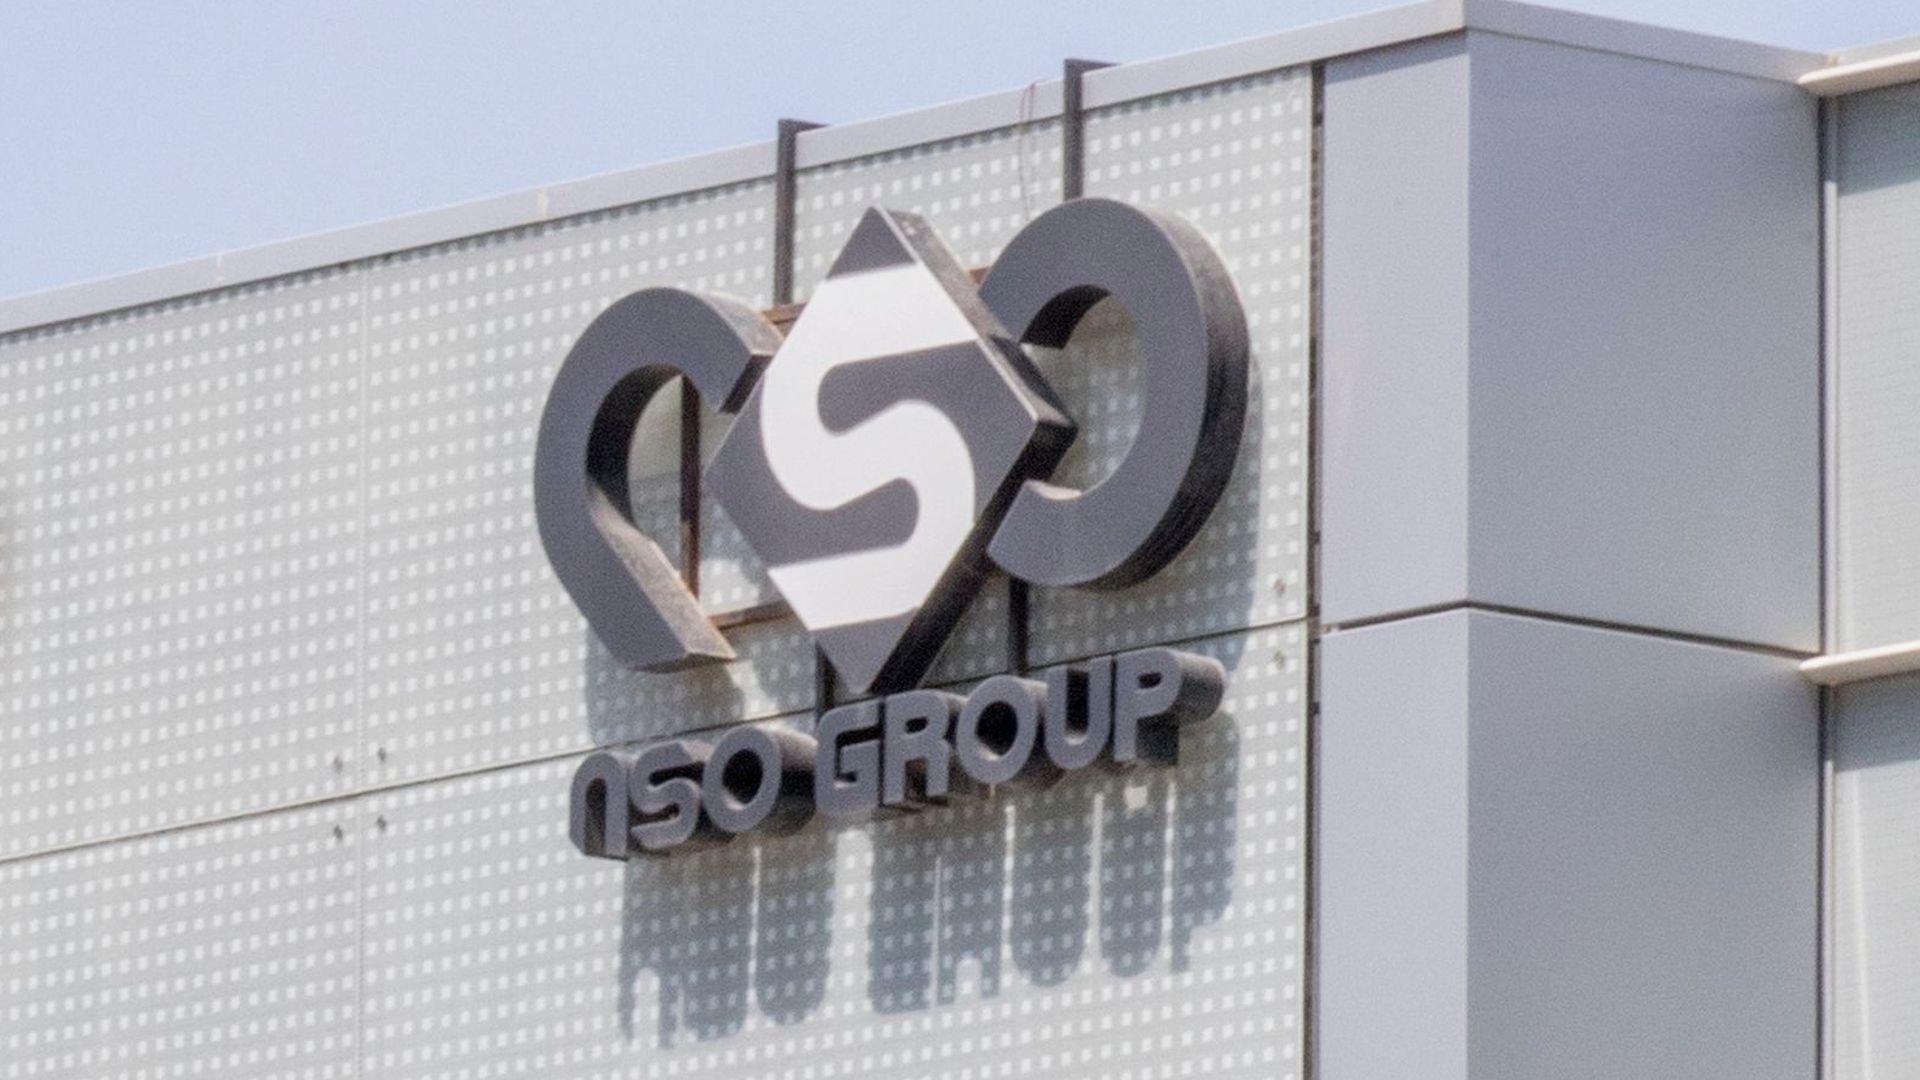 The NSO Group logo on a building in Herzliya, Israel. Photo: Jack Guez/AFP via Getty Images